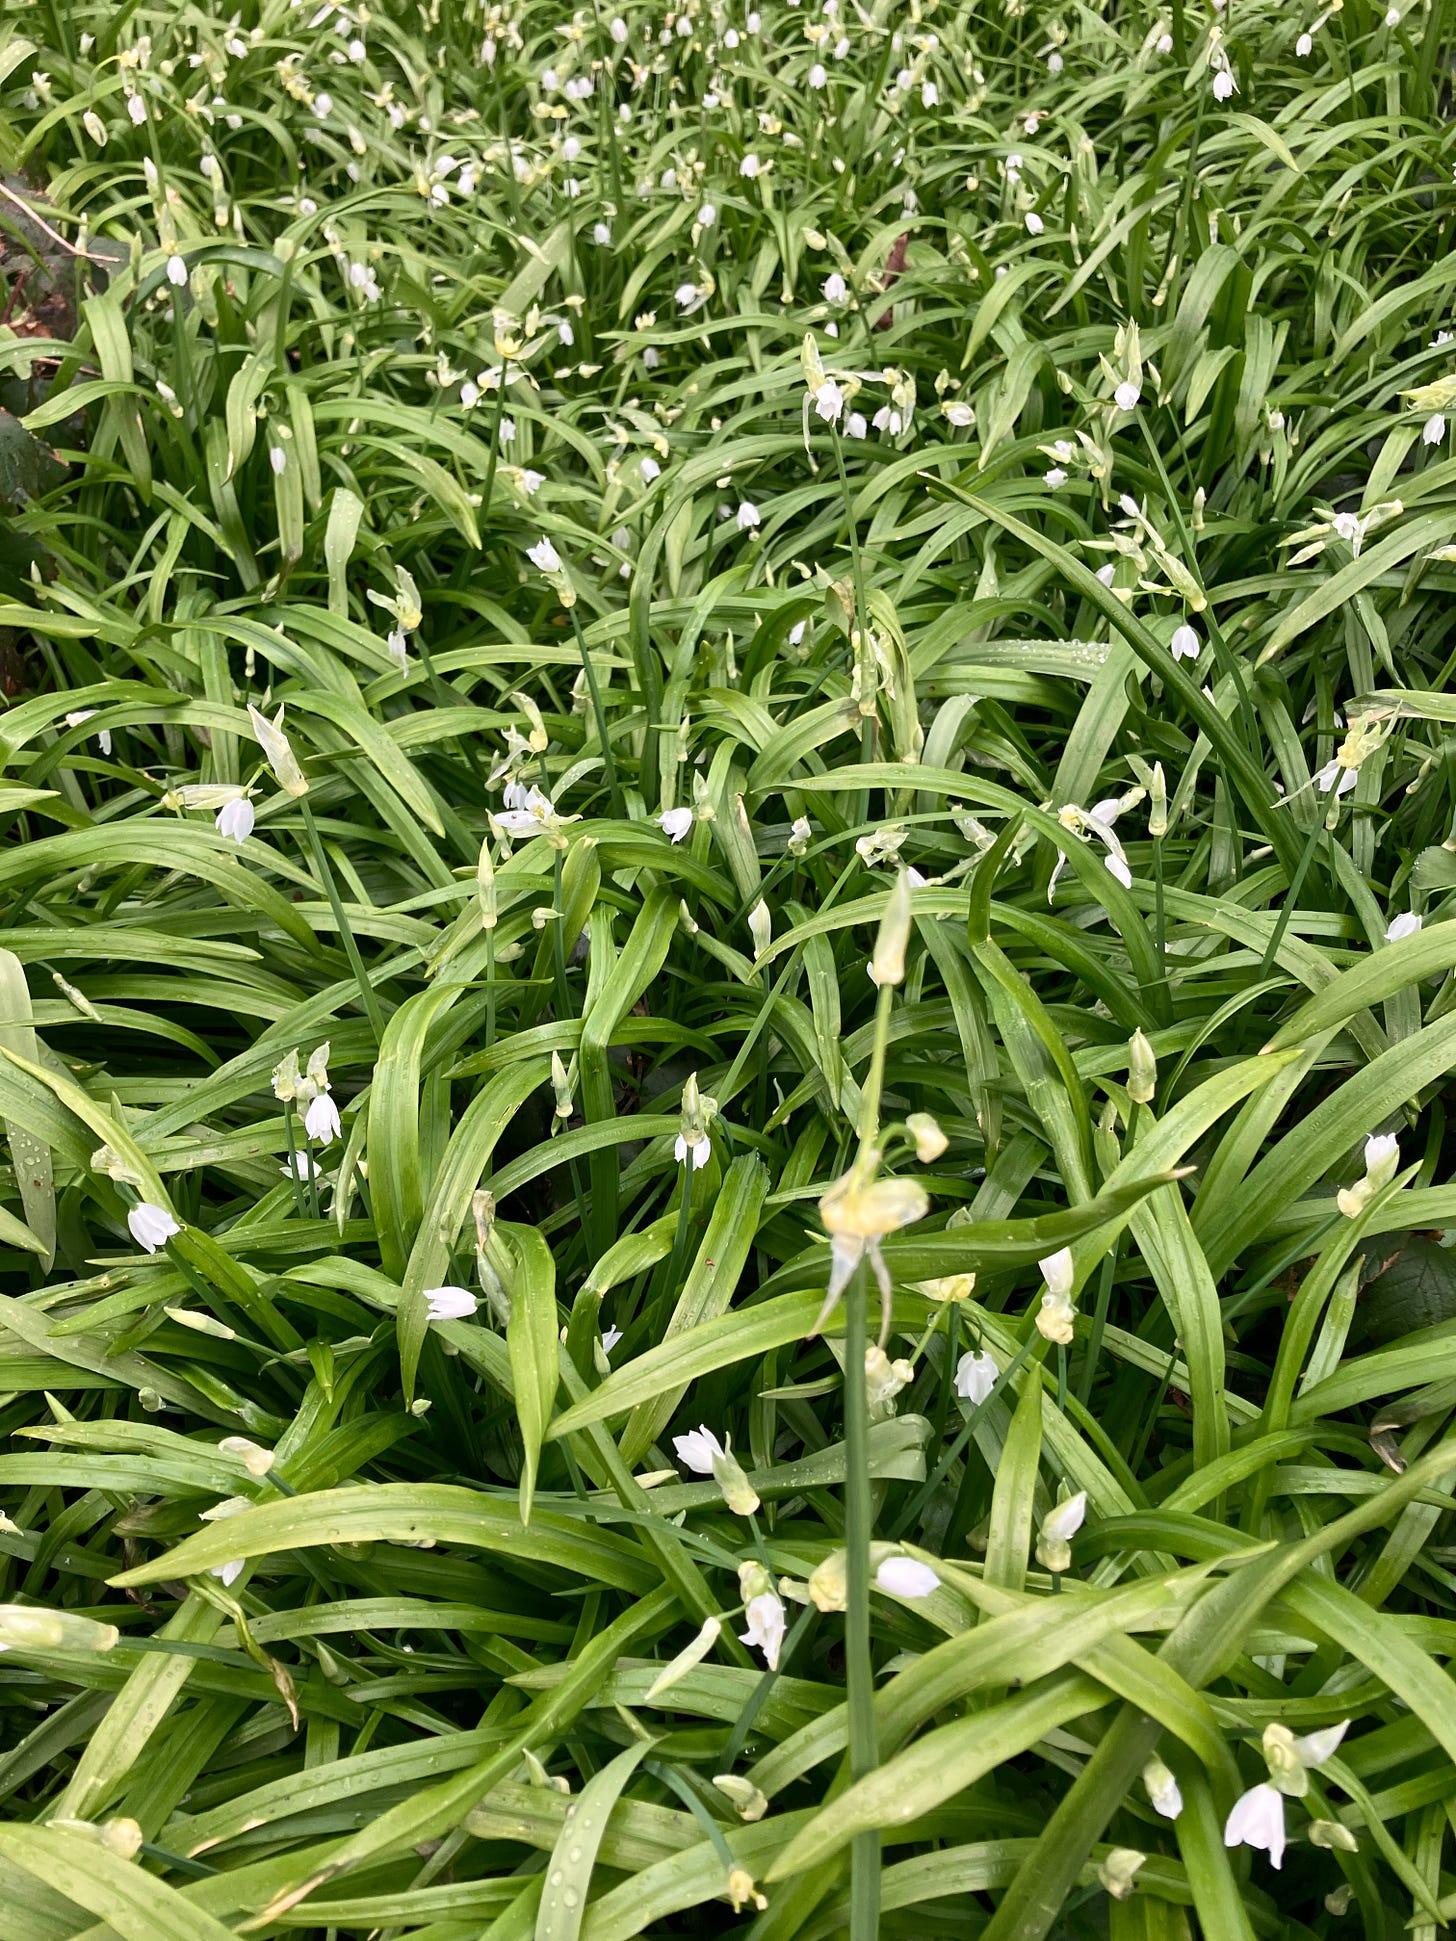 The thin green leaves and white flowers of few-flowered garlic.